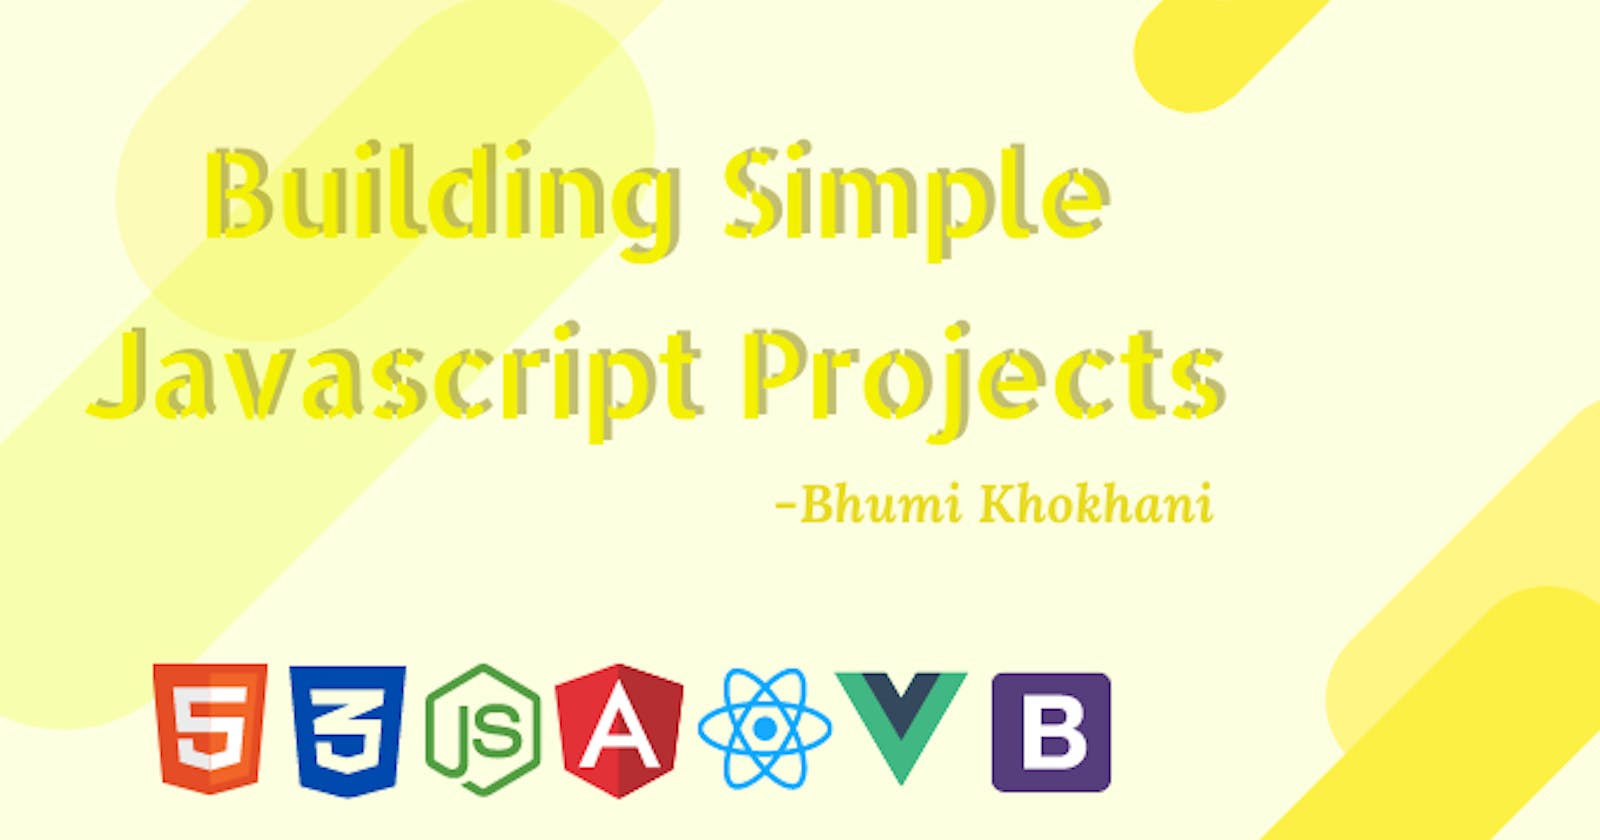 Building Simple Javascript Projects